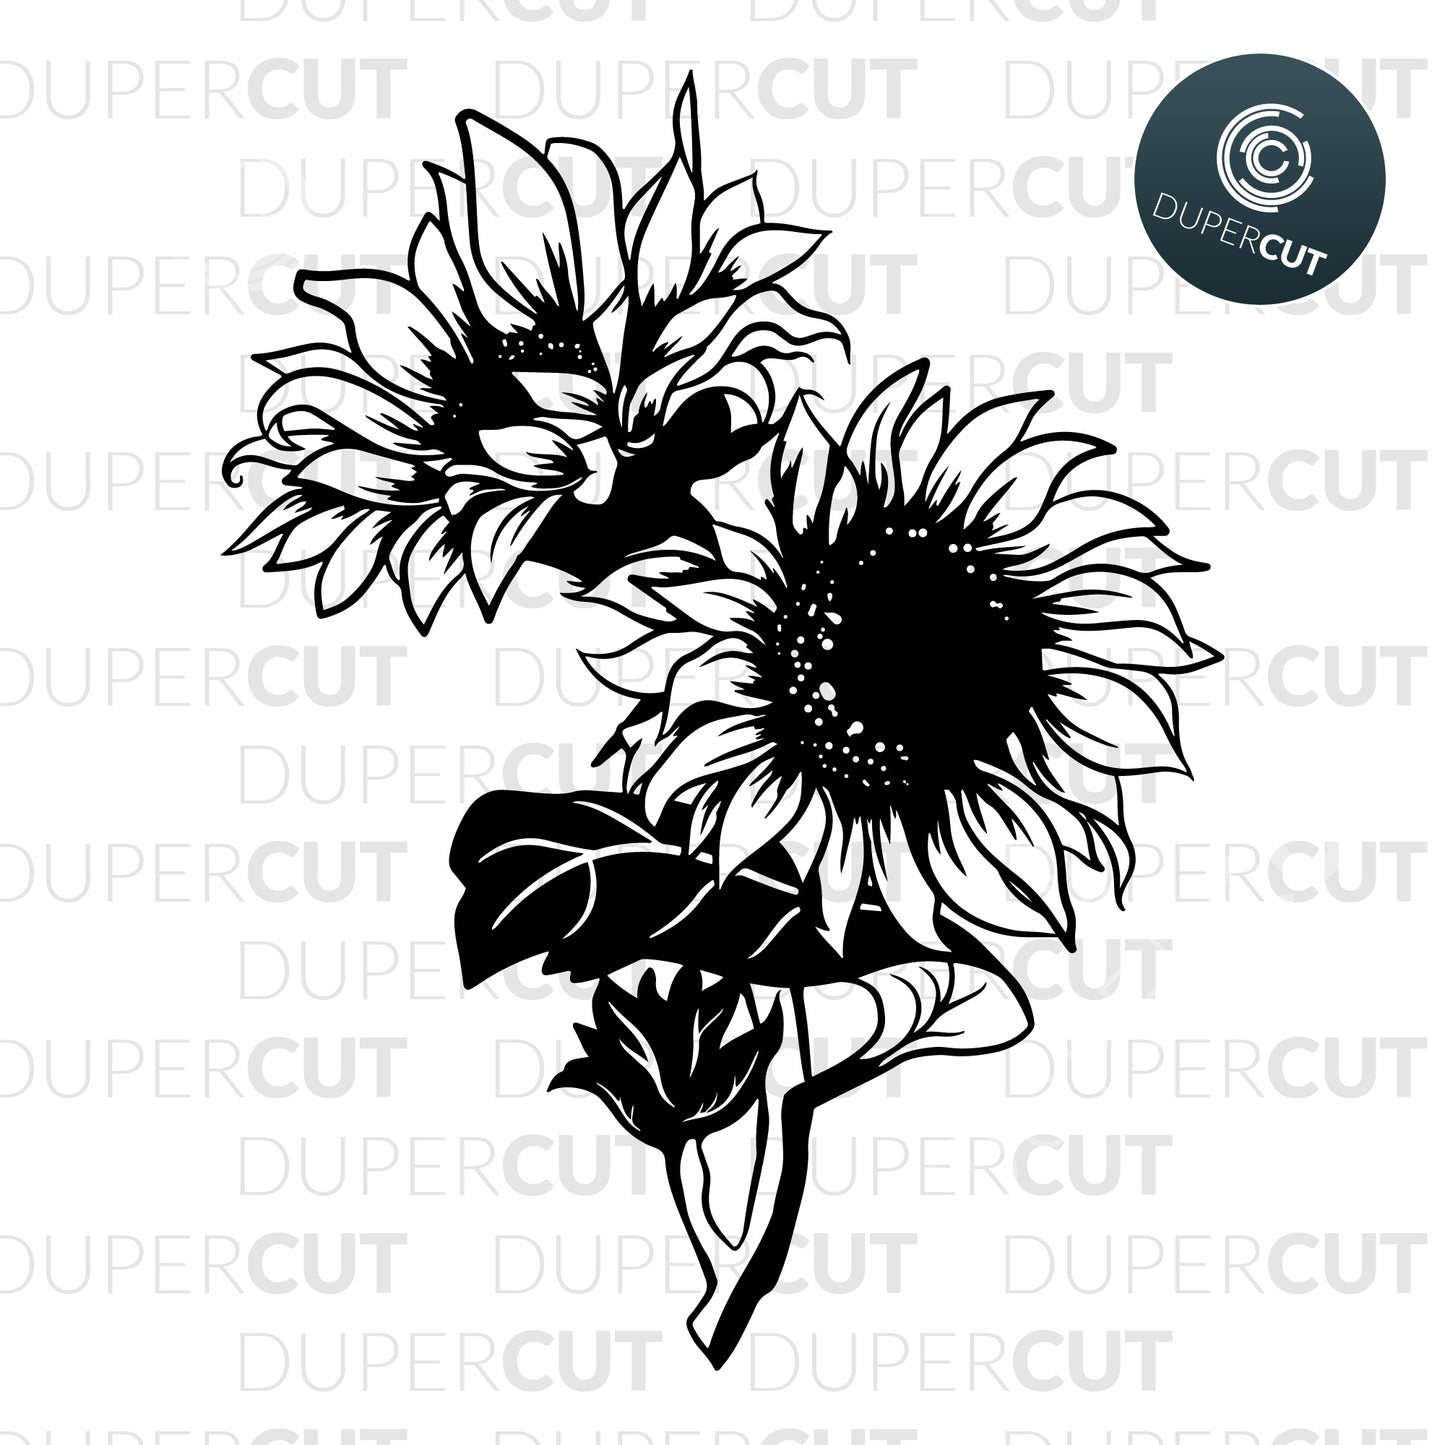 Sunflower bouquet, black and white illustration, cutting  template - SVG DXF PNG files for Cricut, Glowforge, Silhouette Cameo, CNC Machines